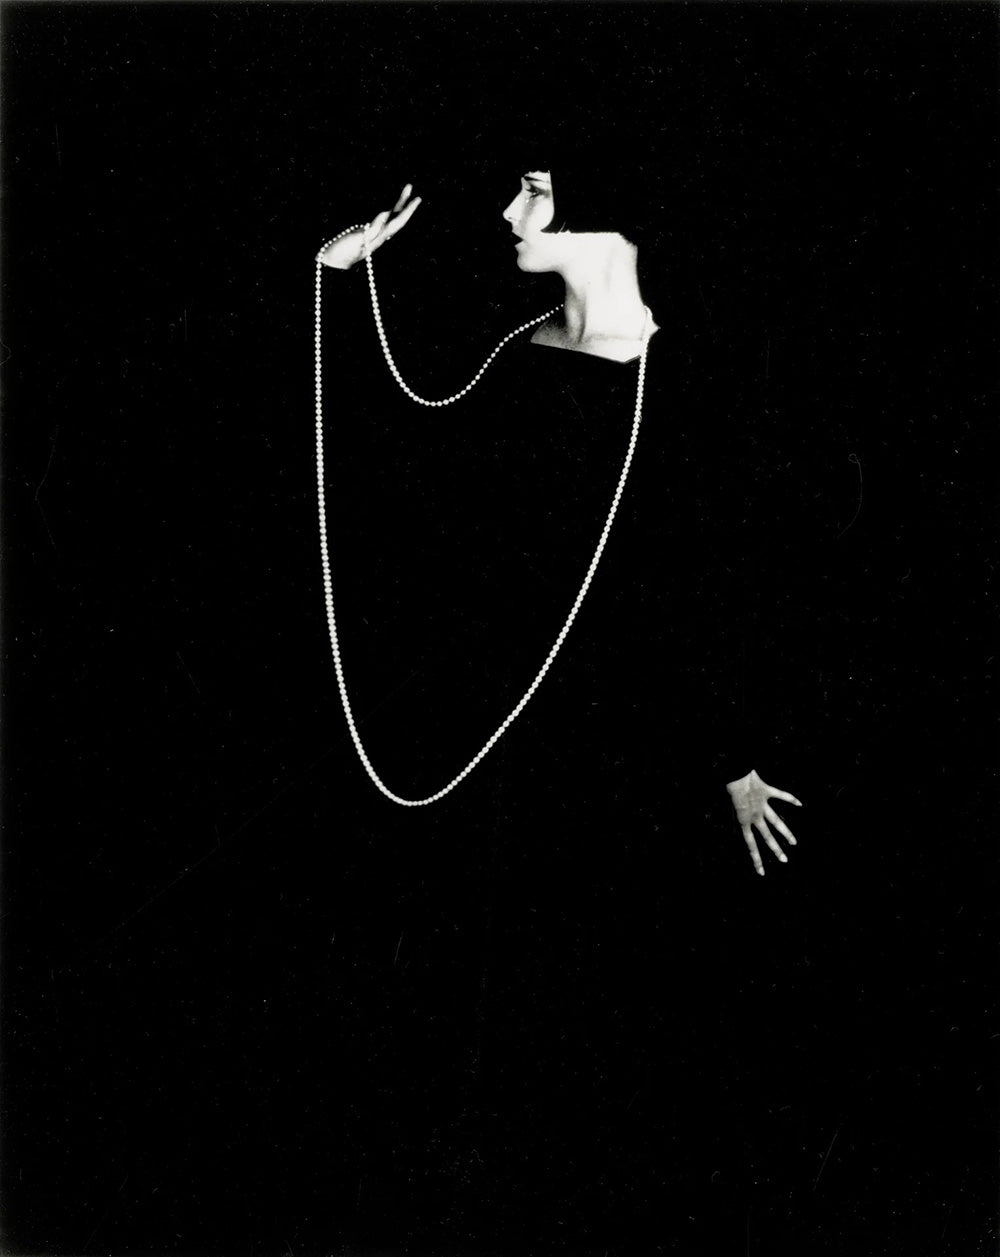 Pearls in Fine Art: Photo Louise Brooks by Eugene Robert Richee, 1928